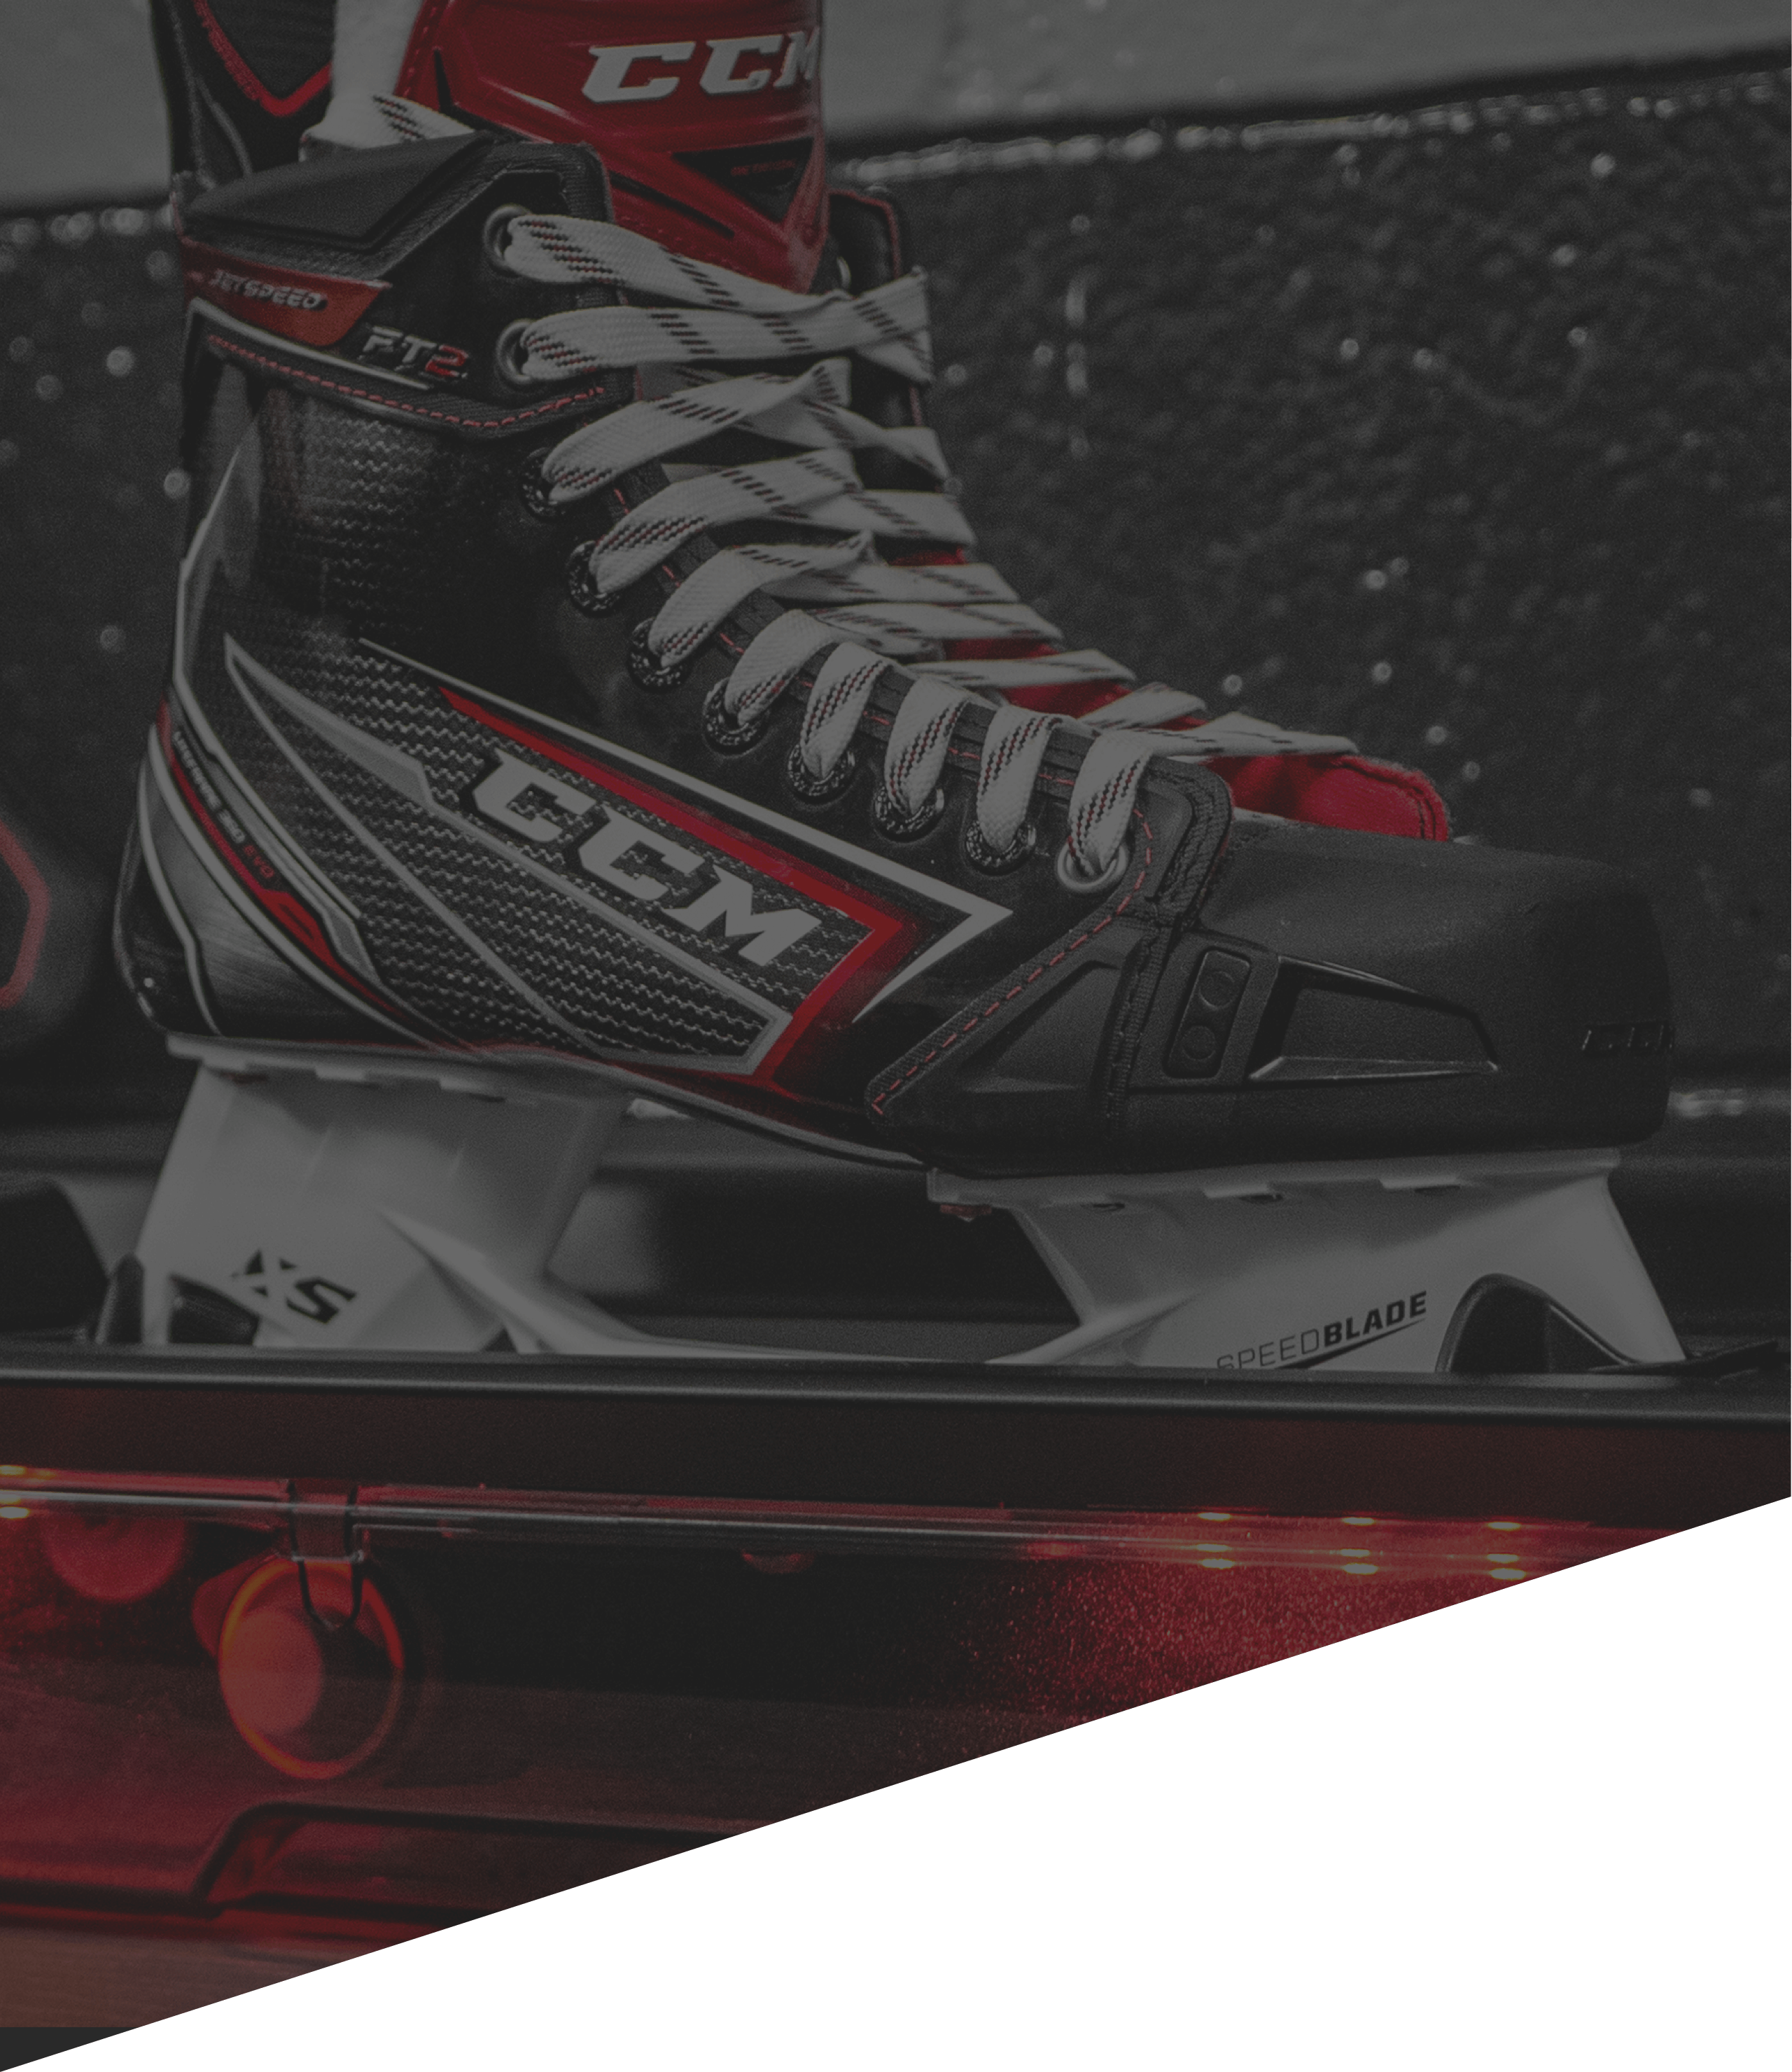 Sparx Hockey - The Sparx Sharpener allows you to receive professional  quality edges all in a clean, safe environment. Keep the sharpener anywhere  you want, even your kitchen.